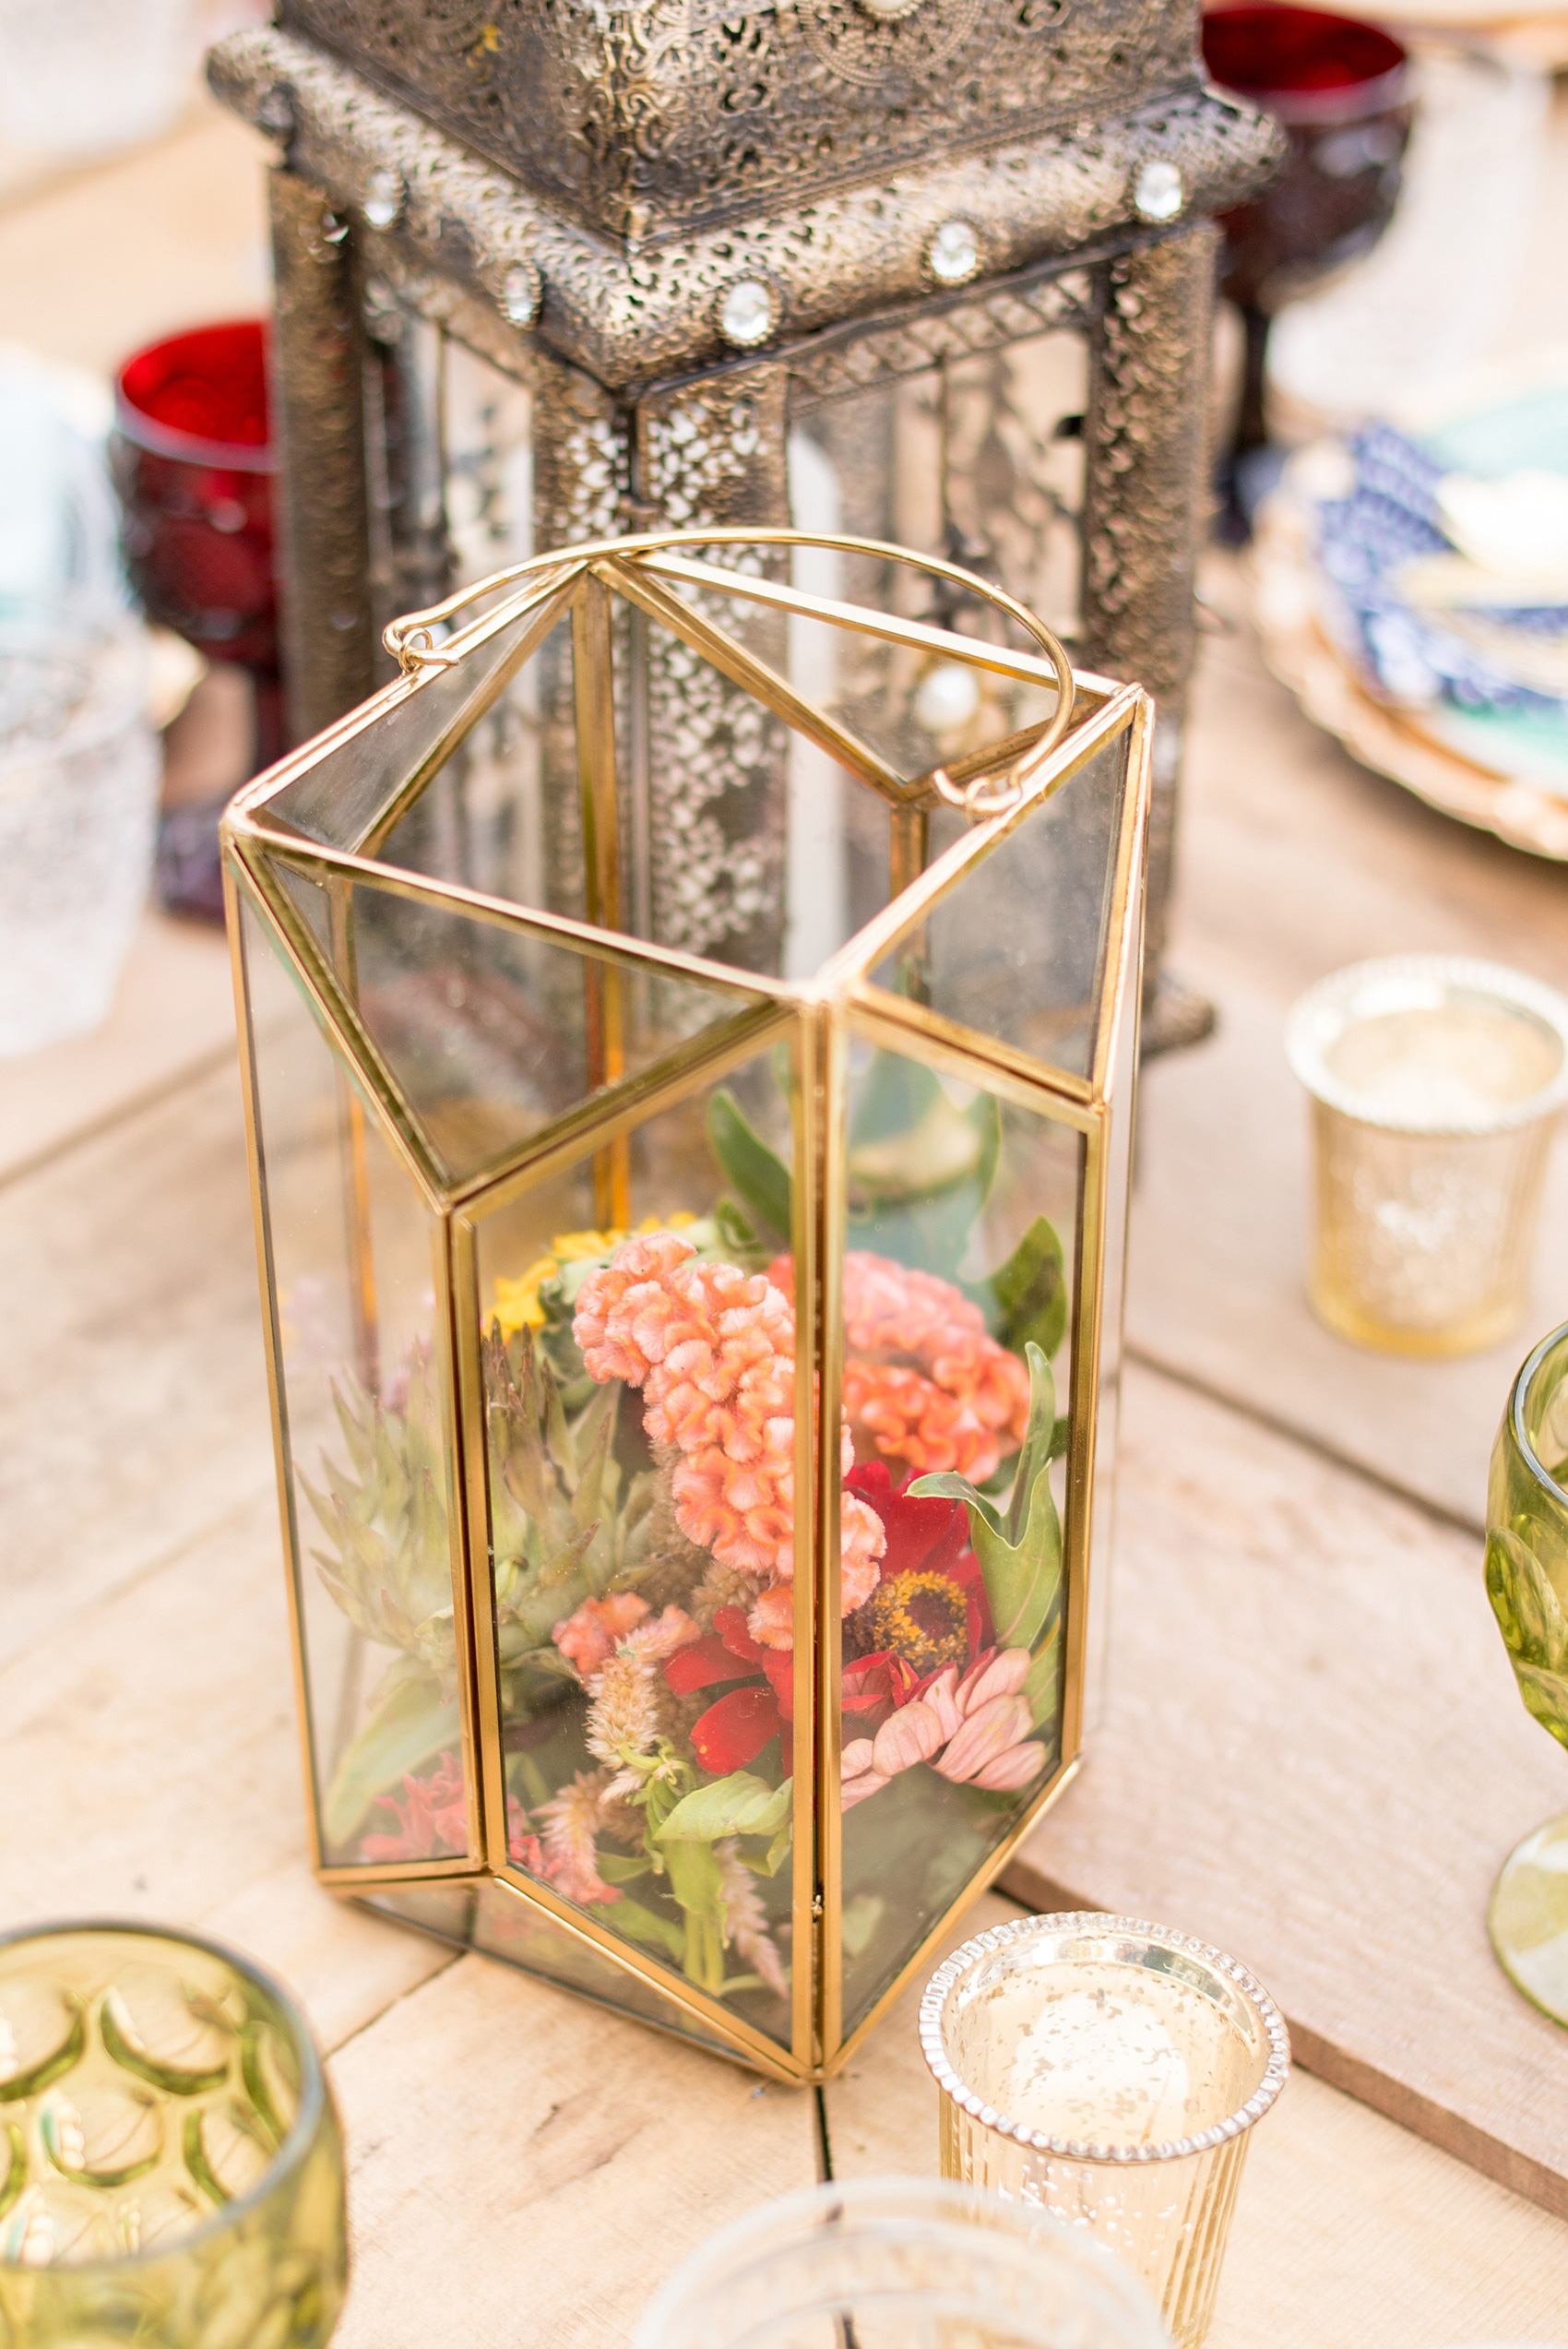 Mikkel Paige Photography photo of Moroccan themed party with flowers in gold geometric lanterns.